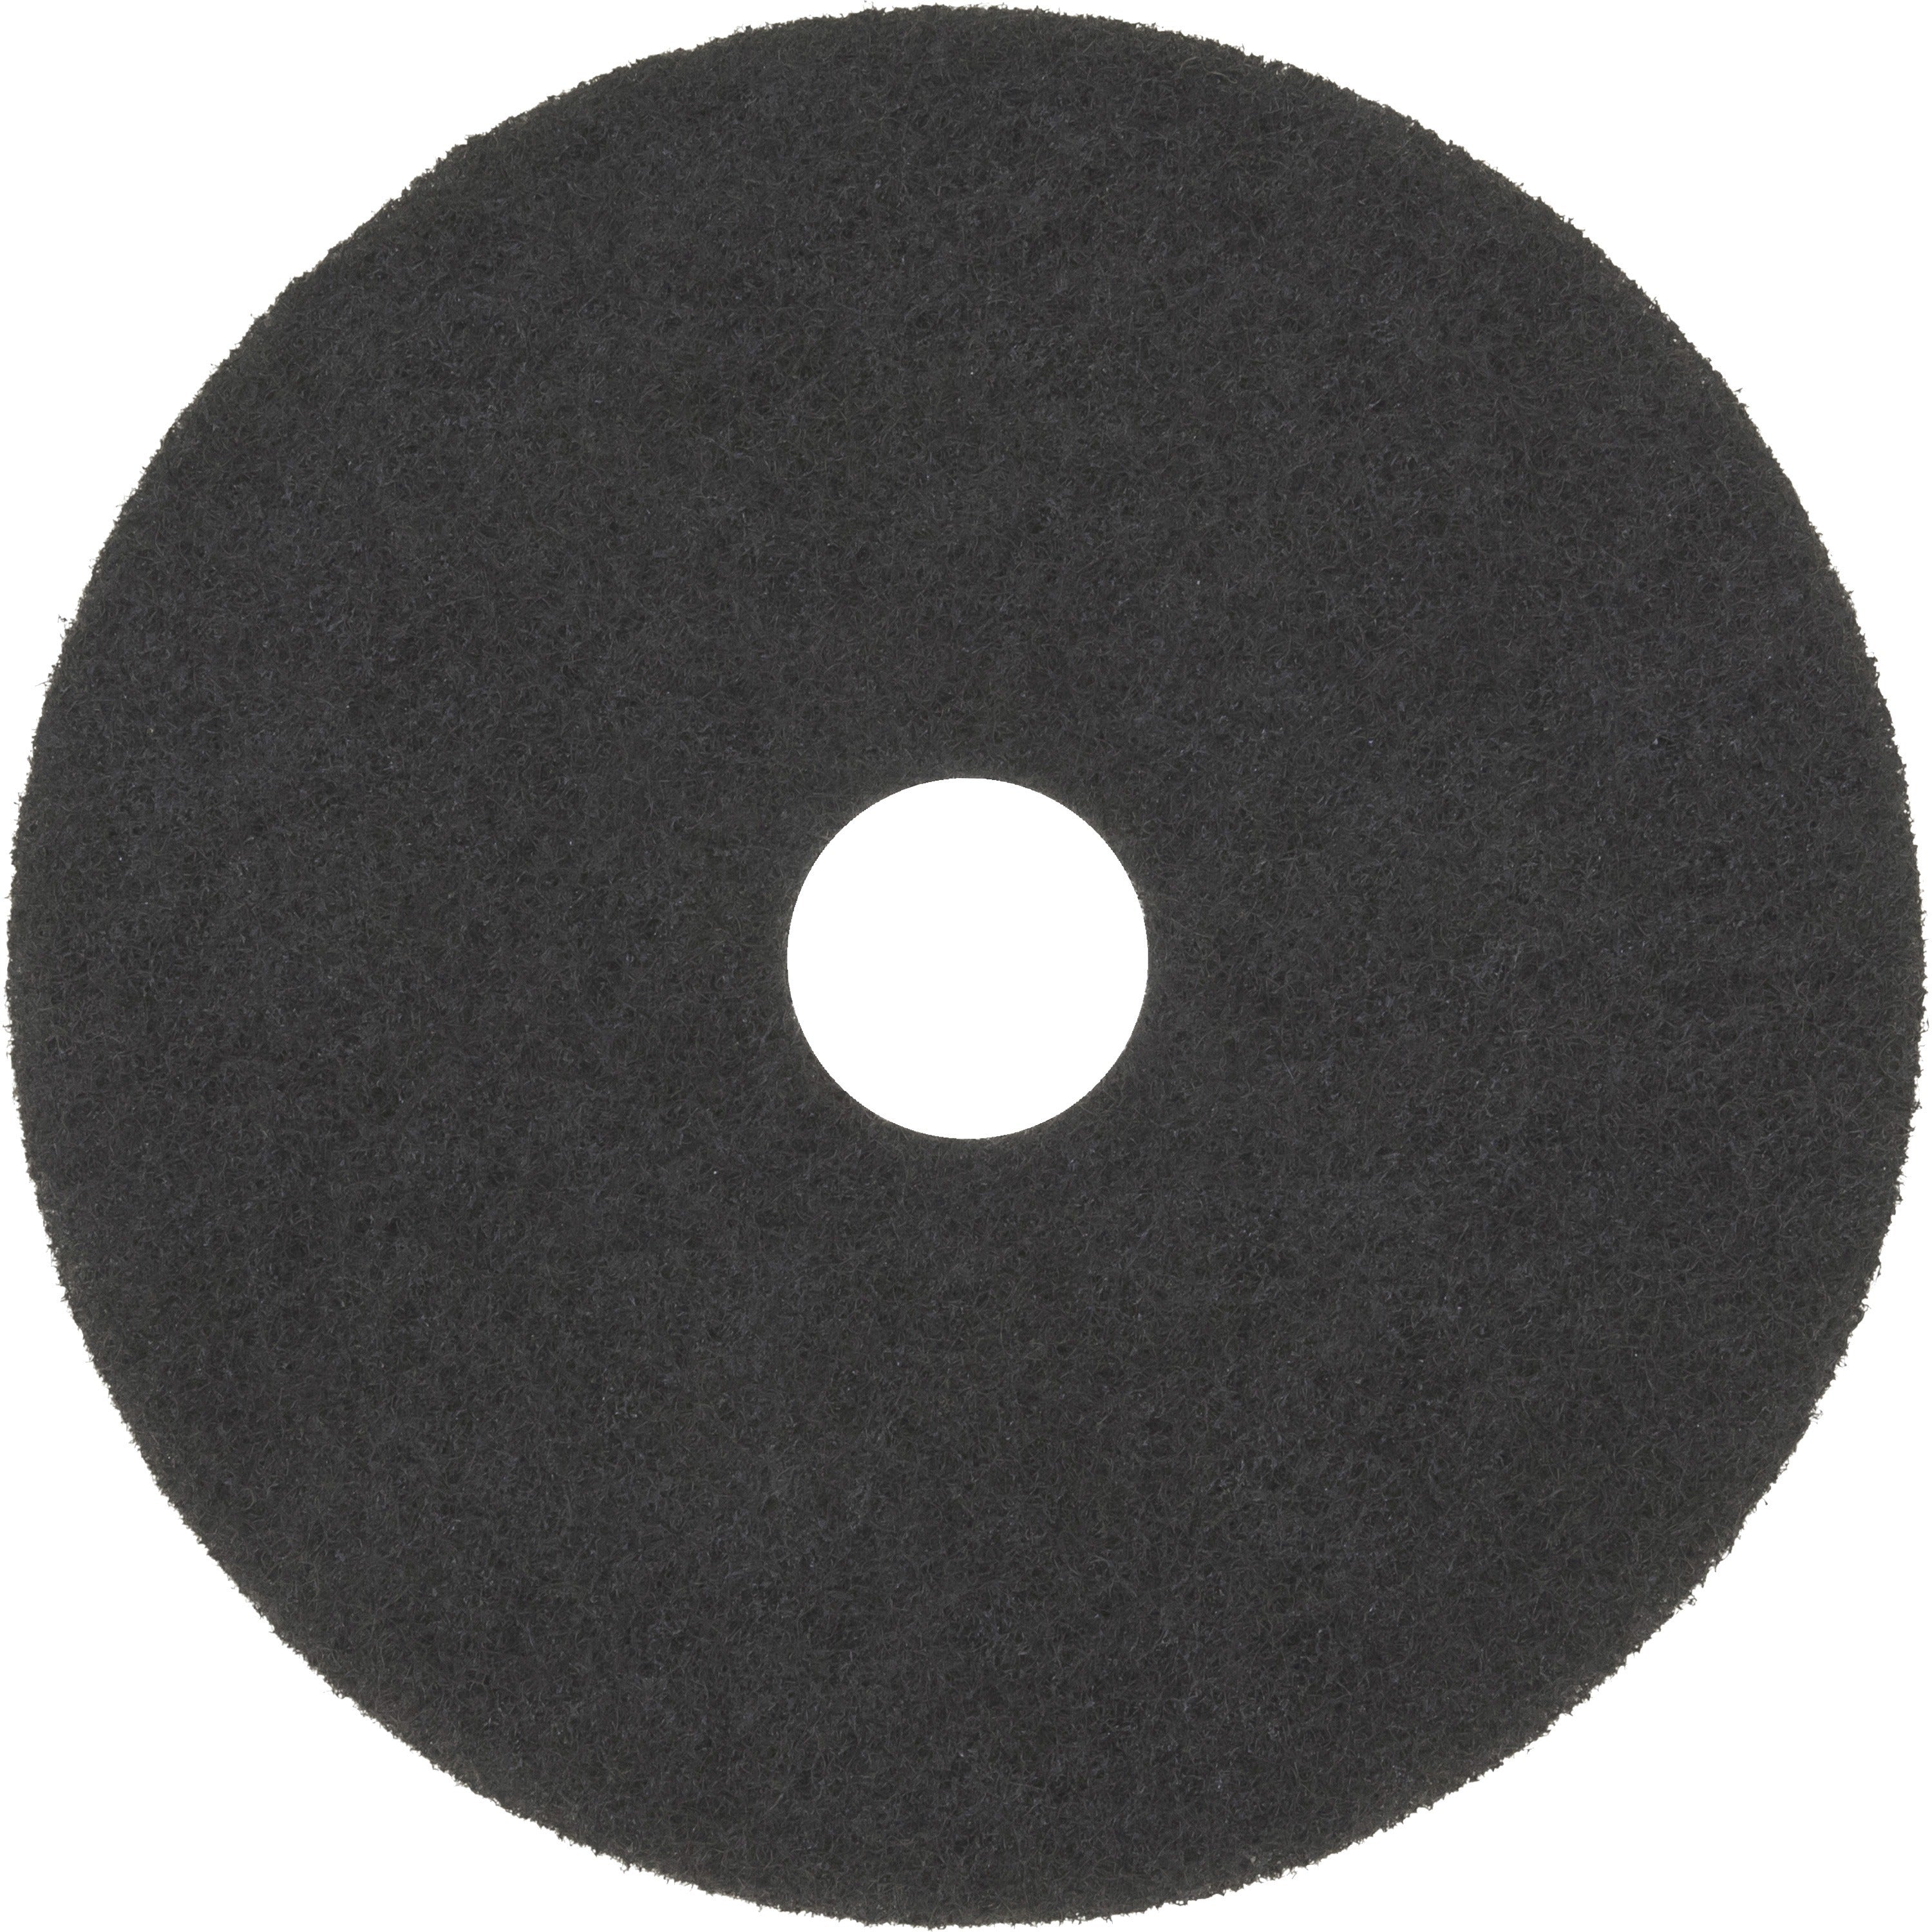 3m-black-stripper-pad-7200-5-carton-round-x-10-diameter-stripping-floor-concrete-vinyl-composition-tile-vct-floor-175-rpm-to-600-rpm-speed-supported-textured-abrasive-washable-reusable-nylon-polyester-fiber-black_mmm08372 - 1